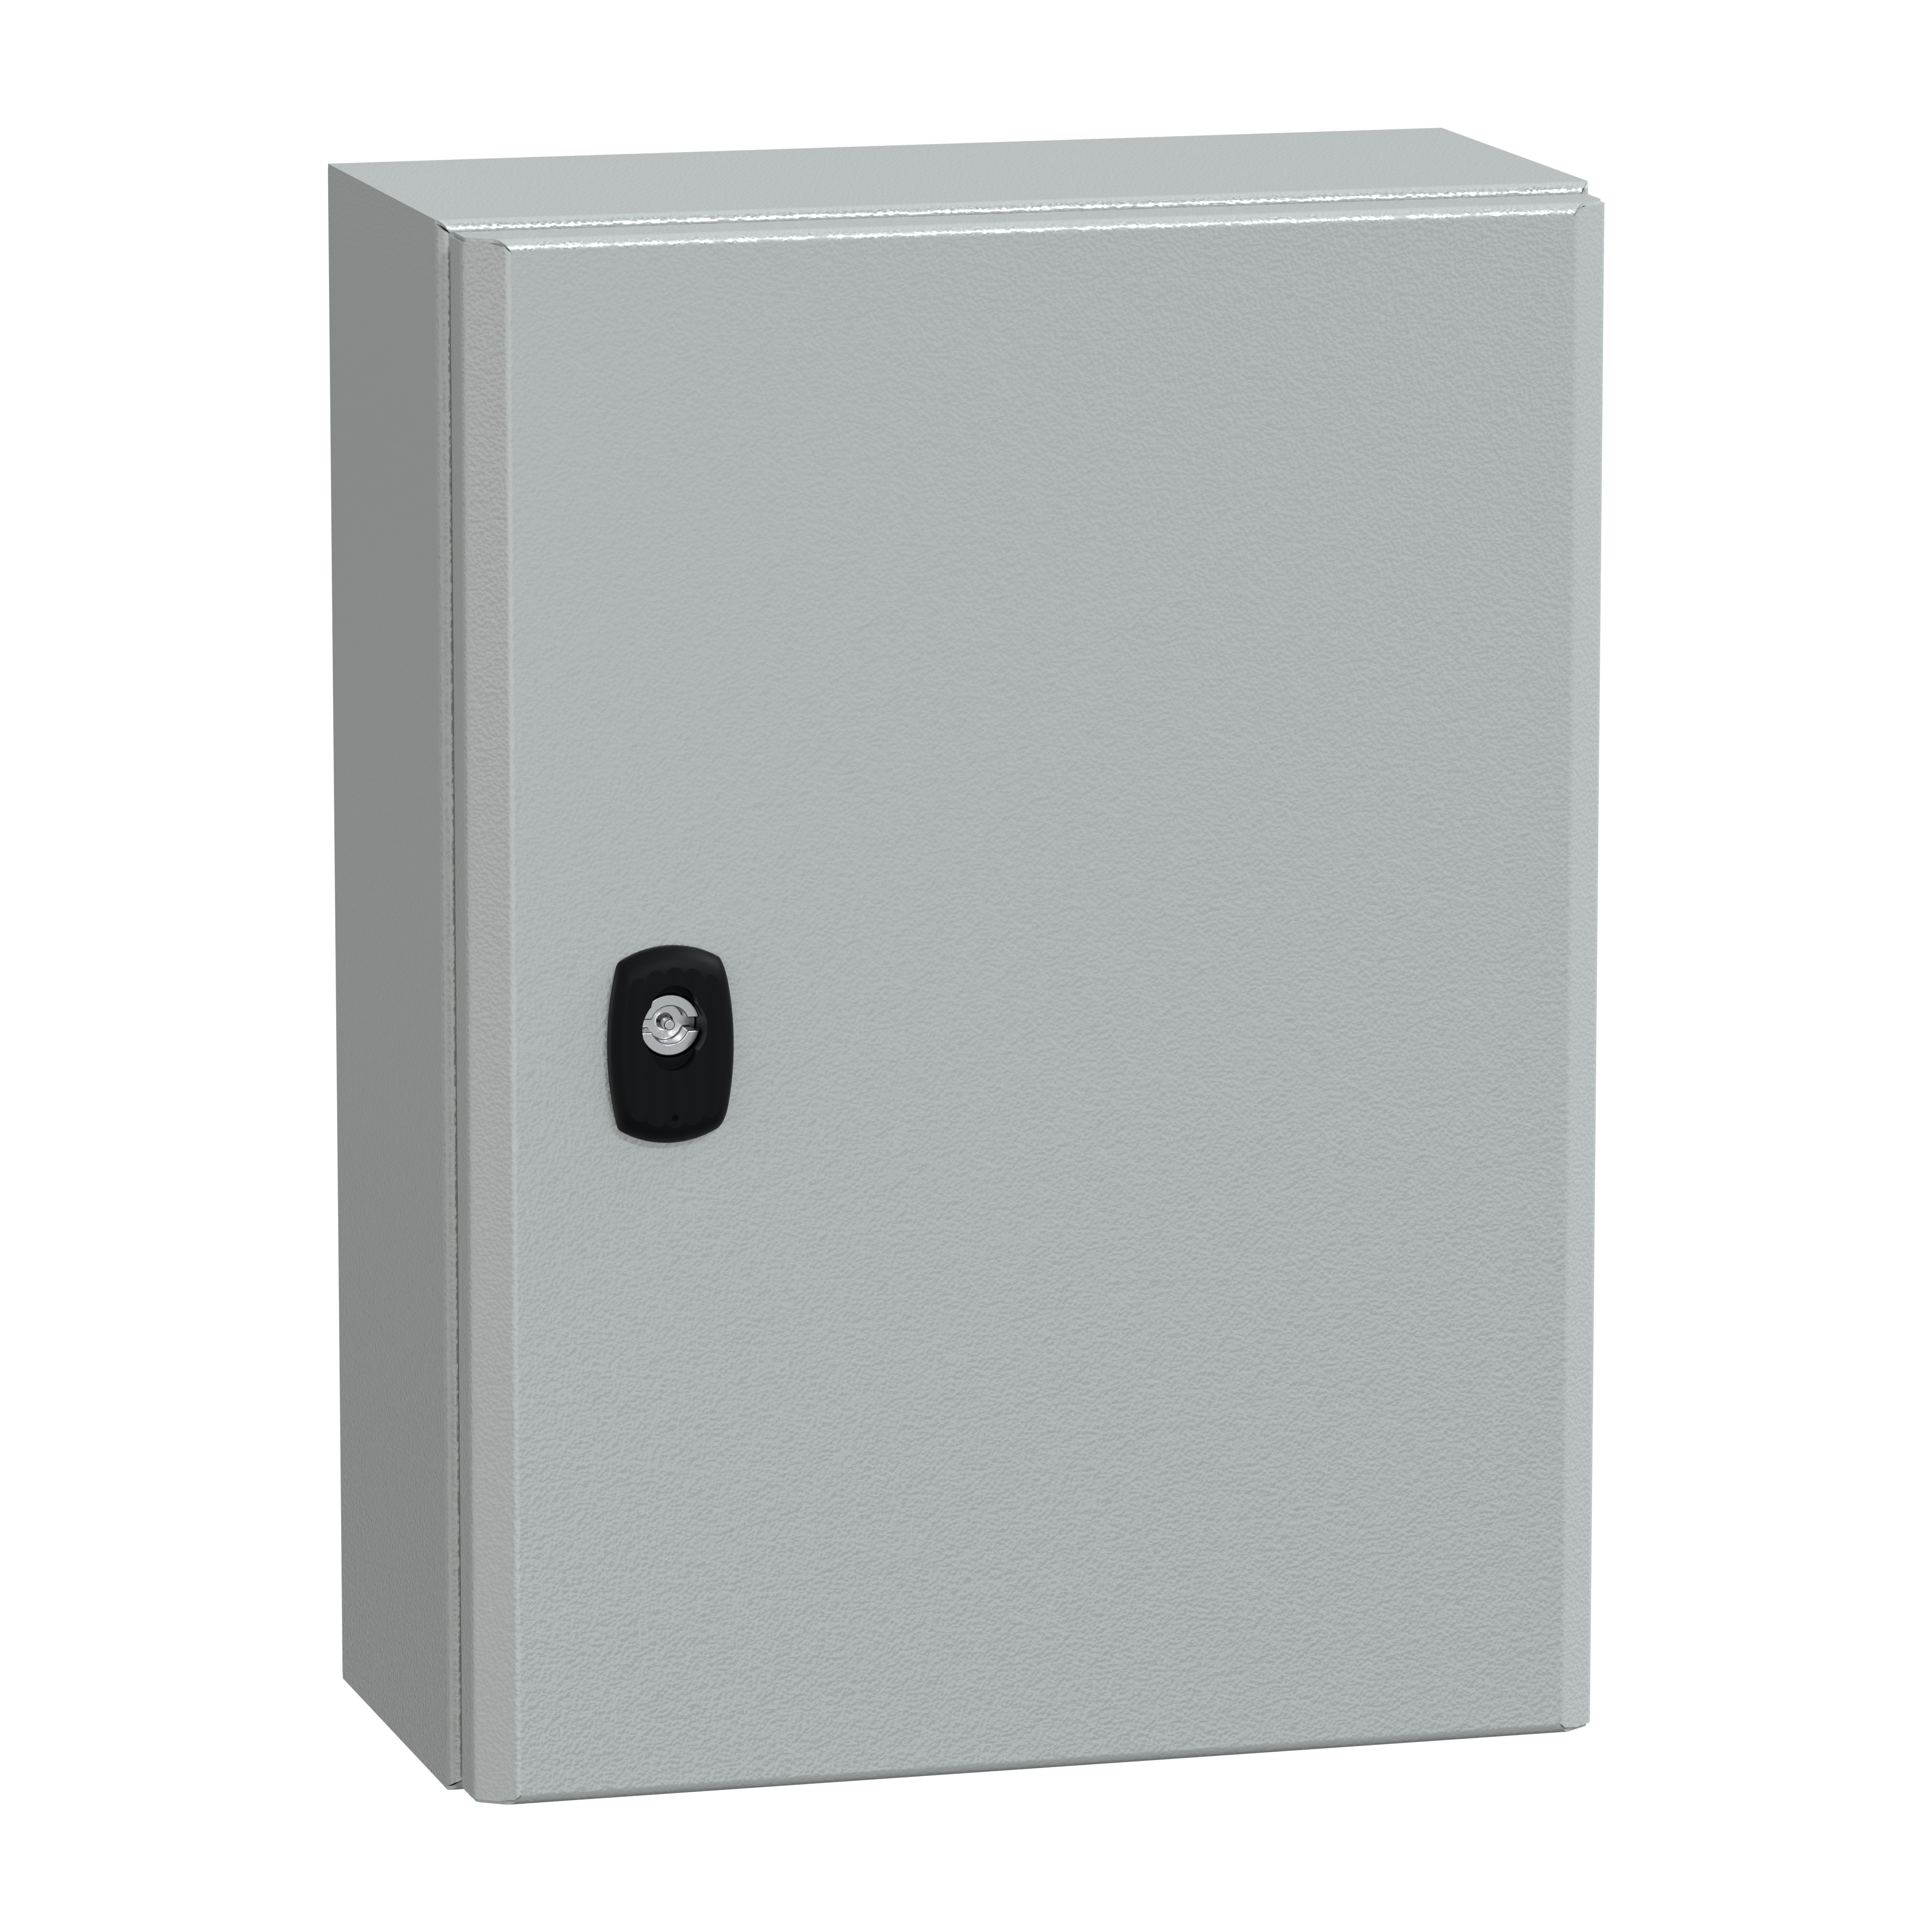 Wall mounted steel enclosure, Spacial S3D, plain door, without mounting plate, 400x300x150mm, IP66, IK10